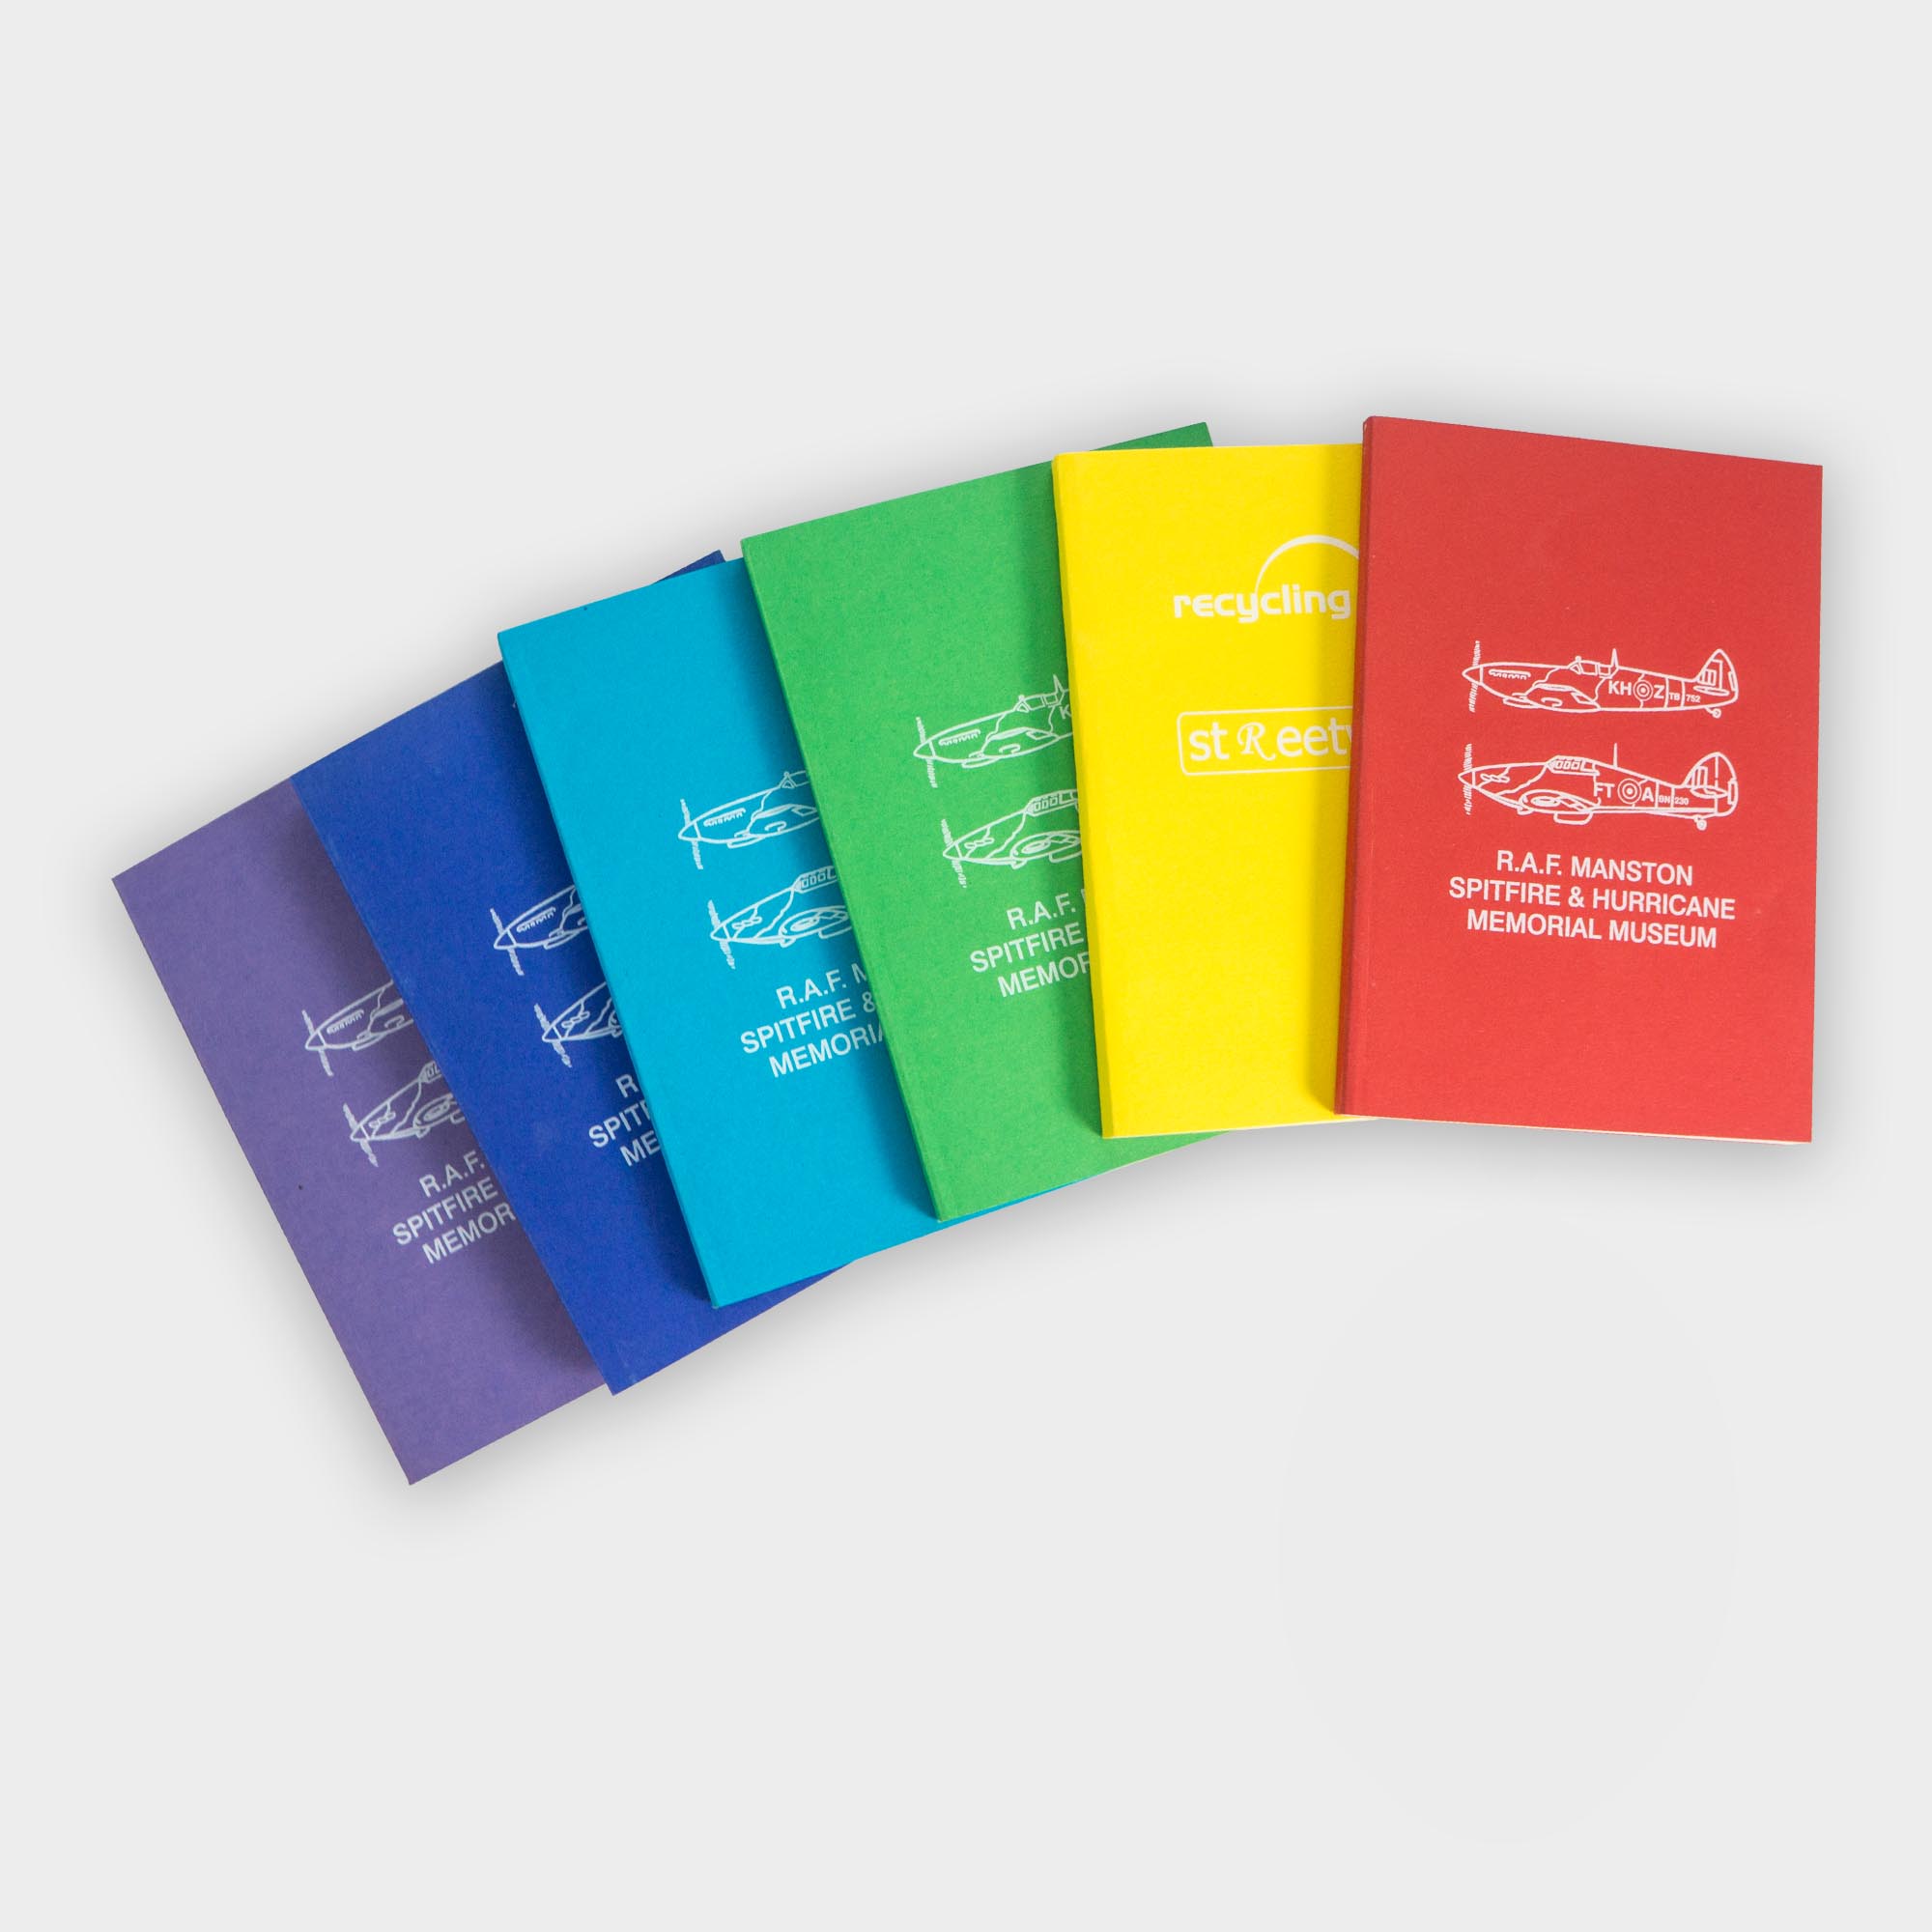 The Green & Good A4 Perfect Bound Notebook made from recycled till receipts. 170gsm recycled coloured cover with 50 sheets of white 80gsm recycled paper. Plain paper content as standard. Lined and squared paper are optional.